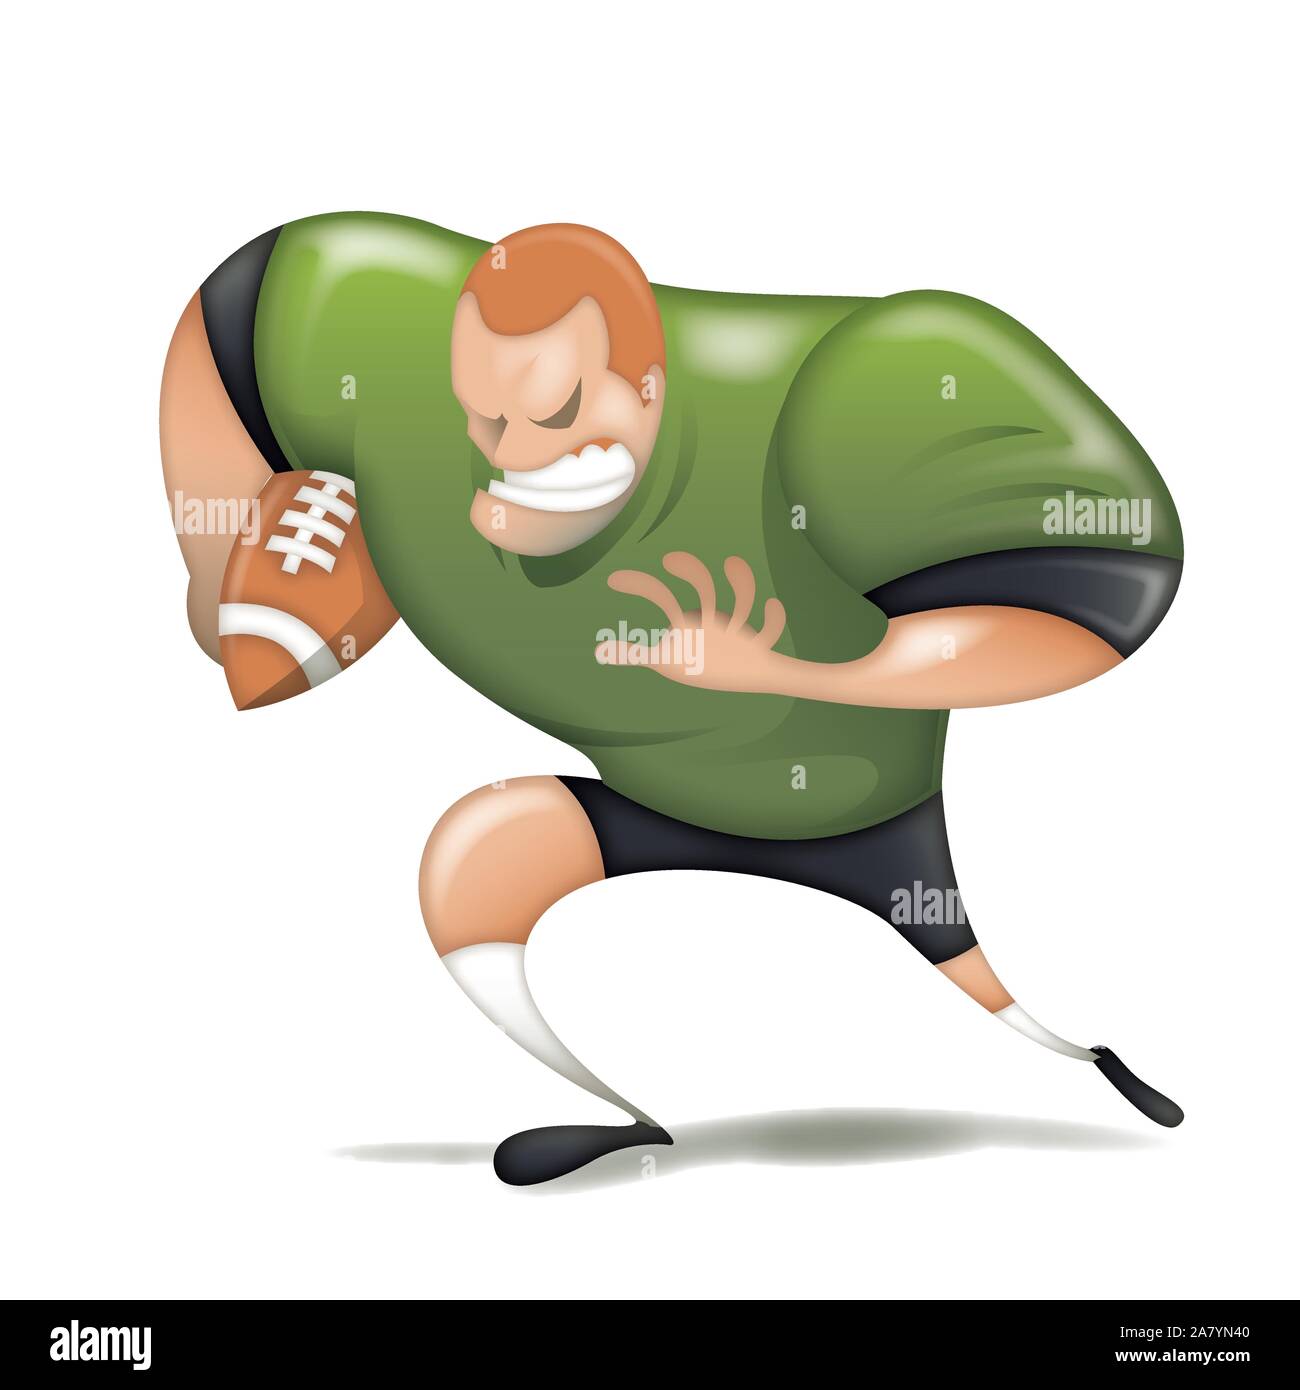 Angry cartoon character rugby player in action on white background Stock Vector